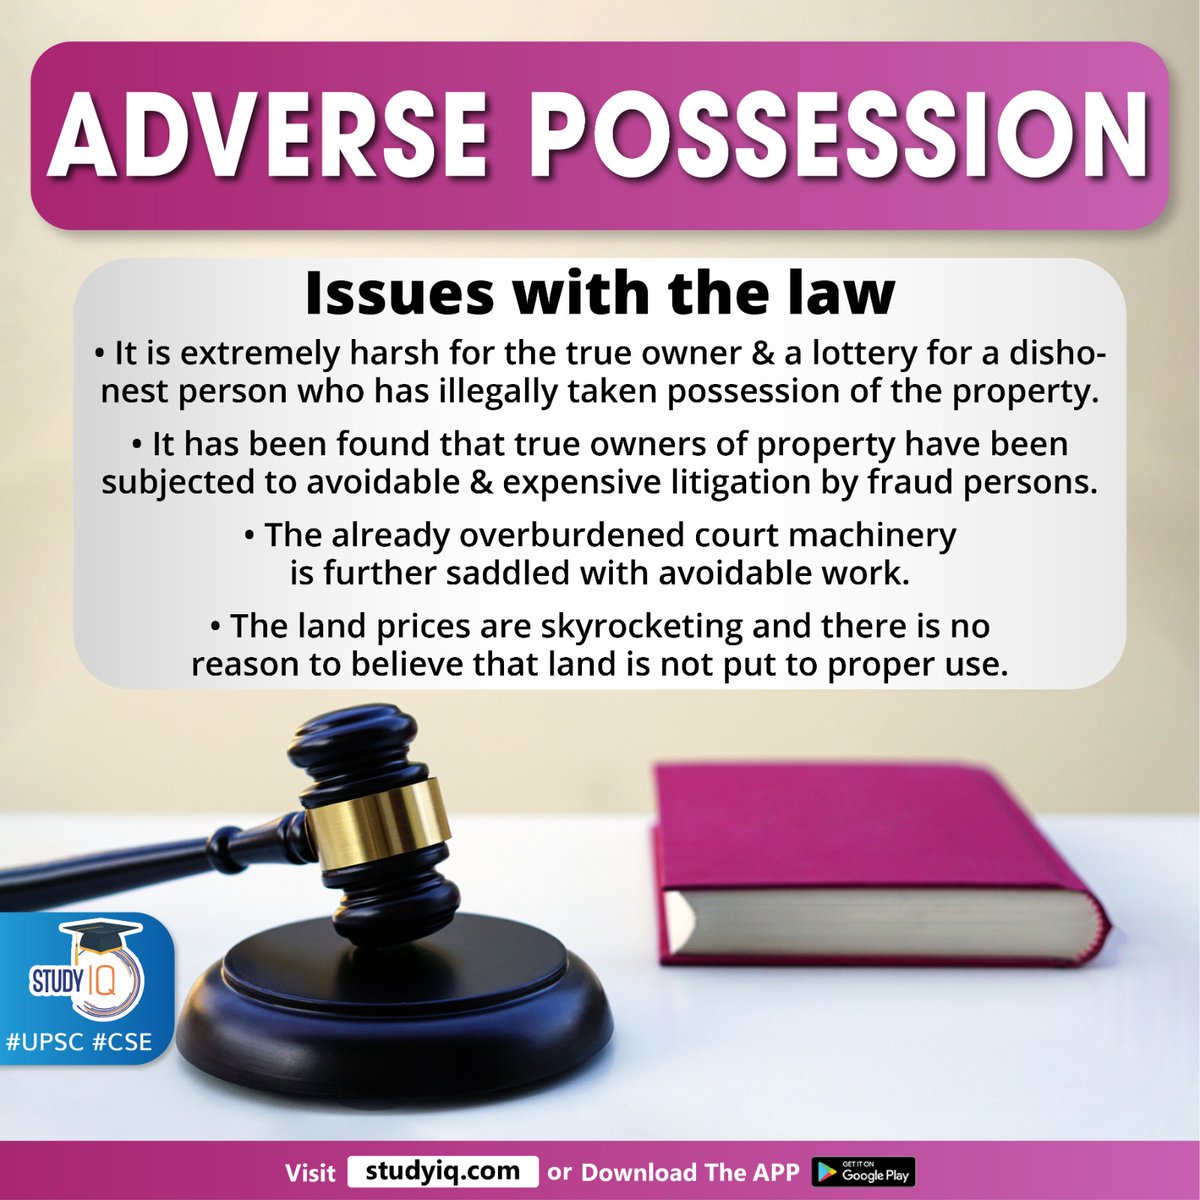 Adverse Possession

#adversepossession #lawcommision #whyinnews #hostilepossessionofproperty #rights #law #propertylaw #ownersofproperty #fraudpersons #avoidablework #upsc #cse #ips #ias